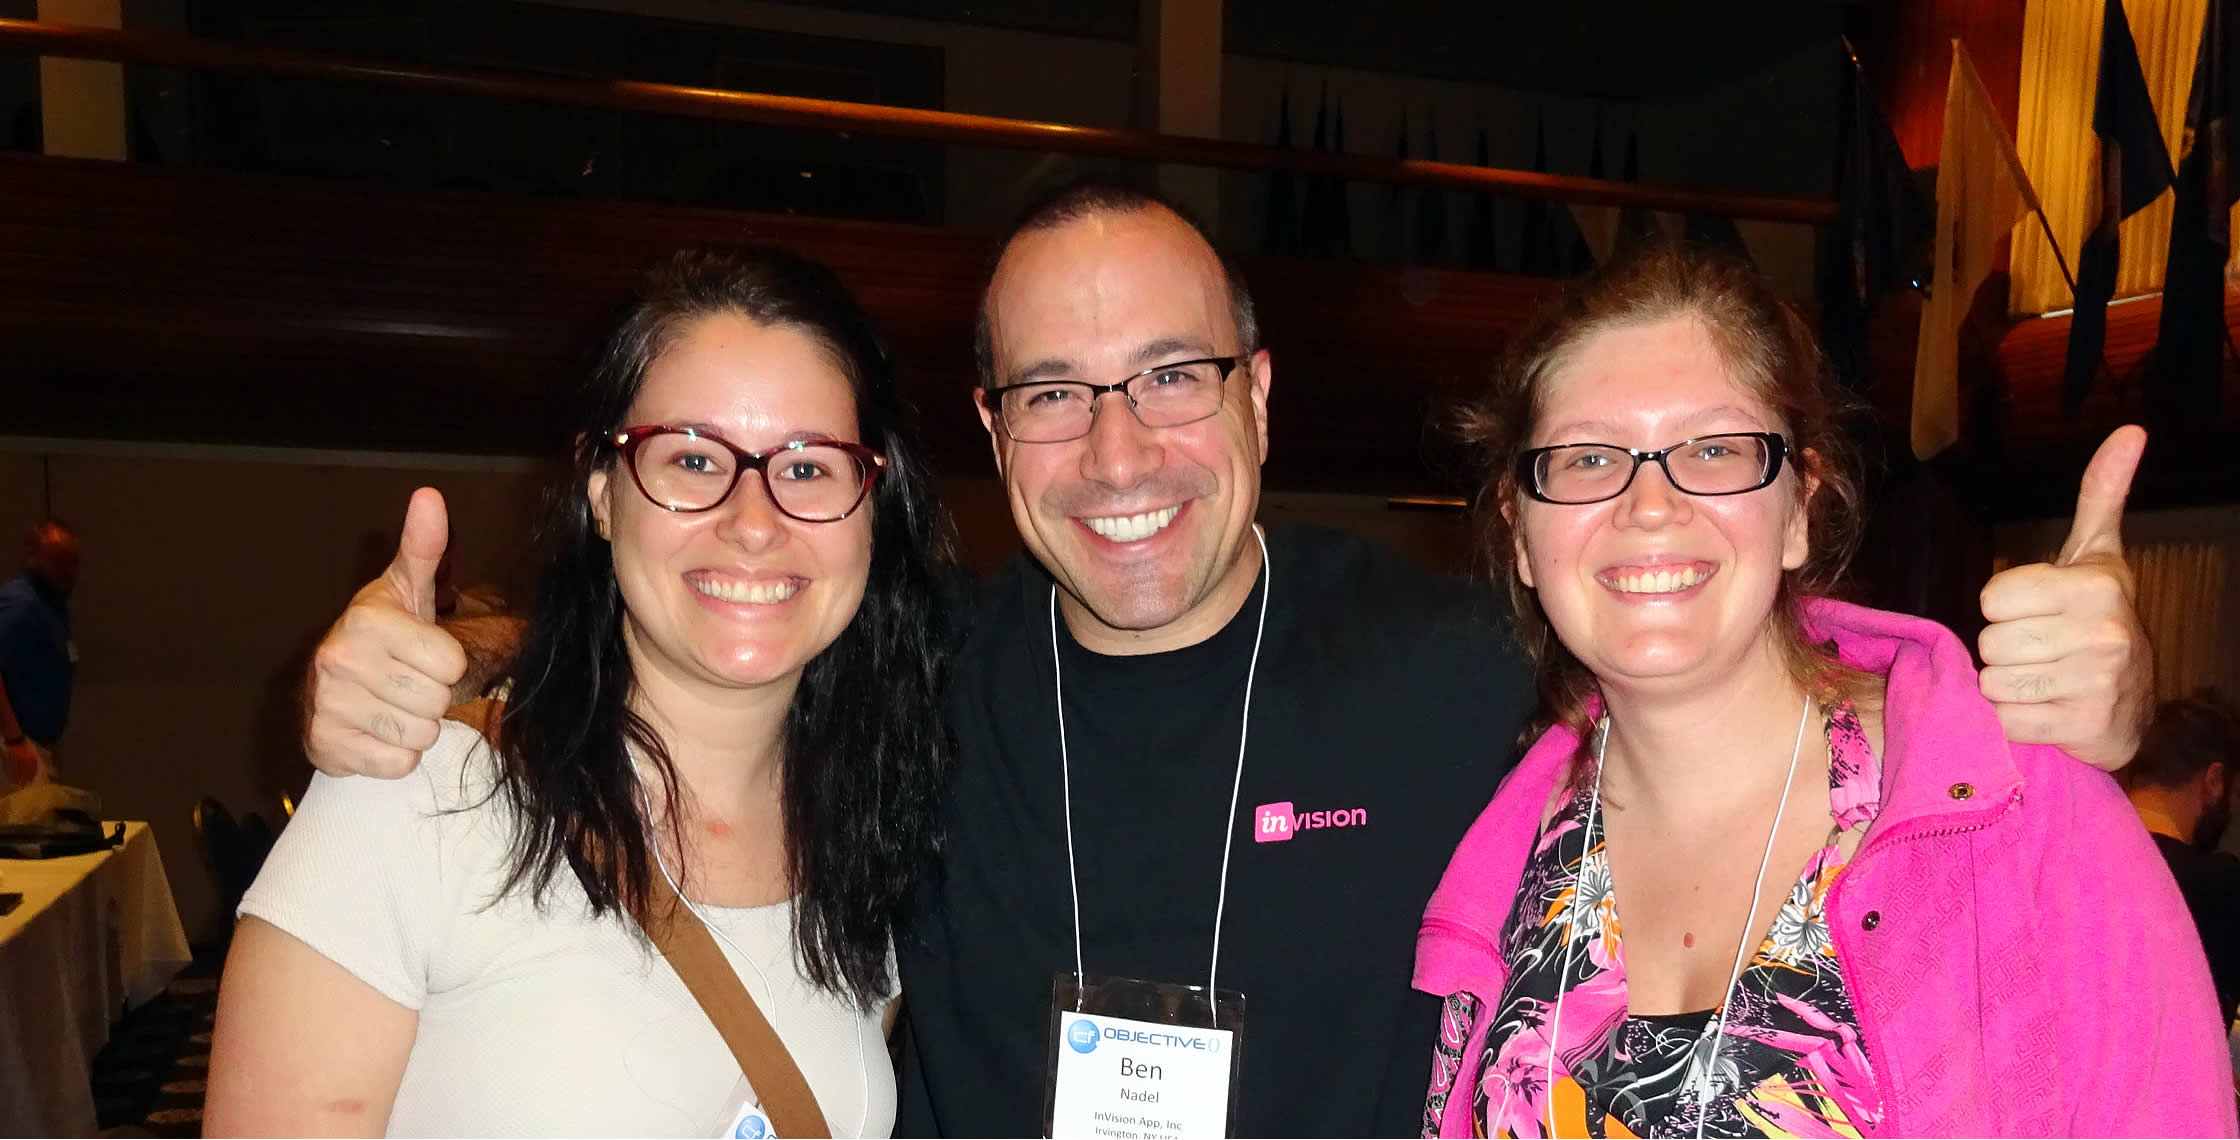 Ben Nadel at cf.Objective() 2017 (Washington, D.C.) with: Julie Dion and Catherine Neault